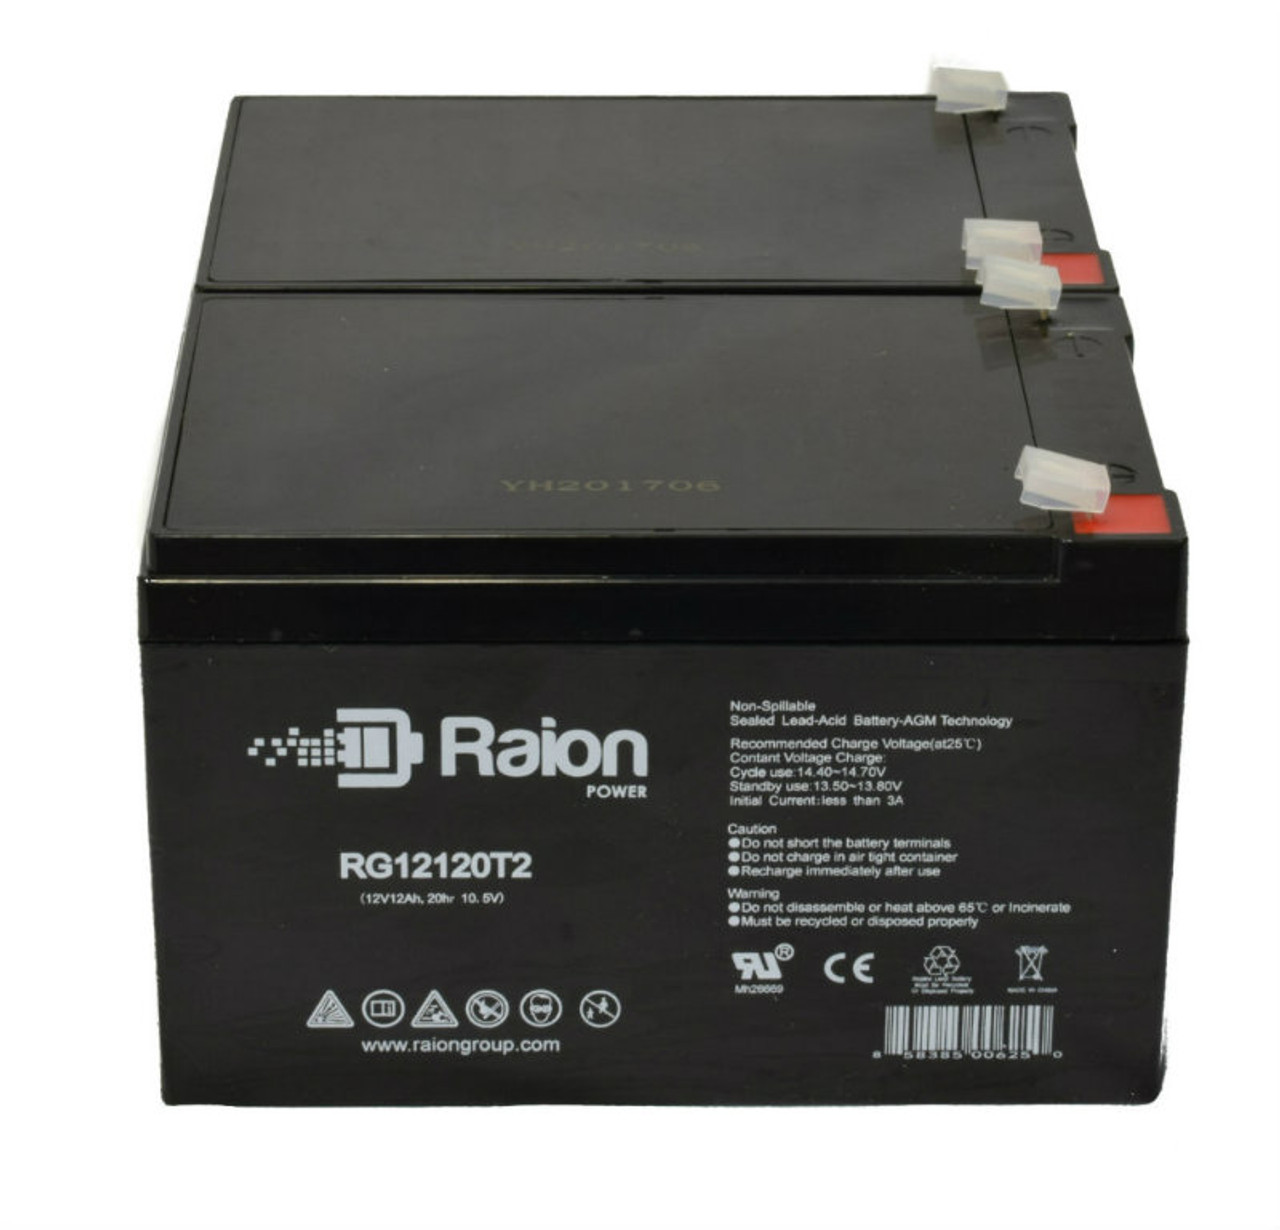 Raion Power 12V 12Ah Non-Spillable Compatible Replacement Battery for CSPower CS12-10 - (2 Pack)